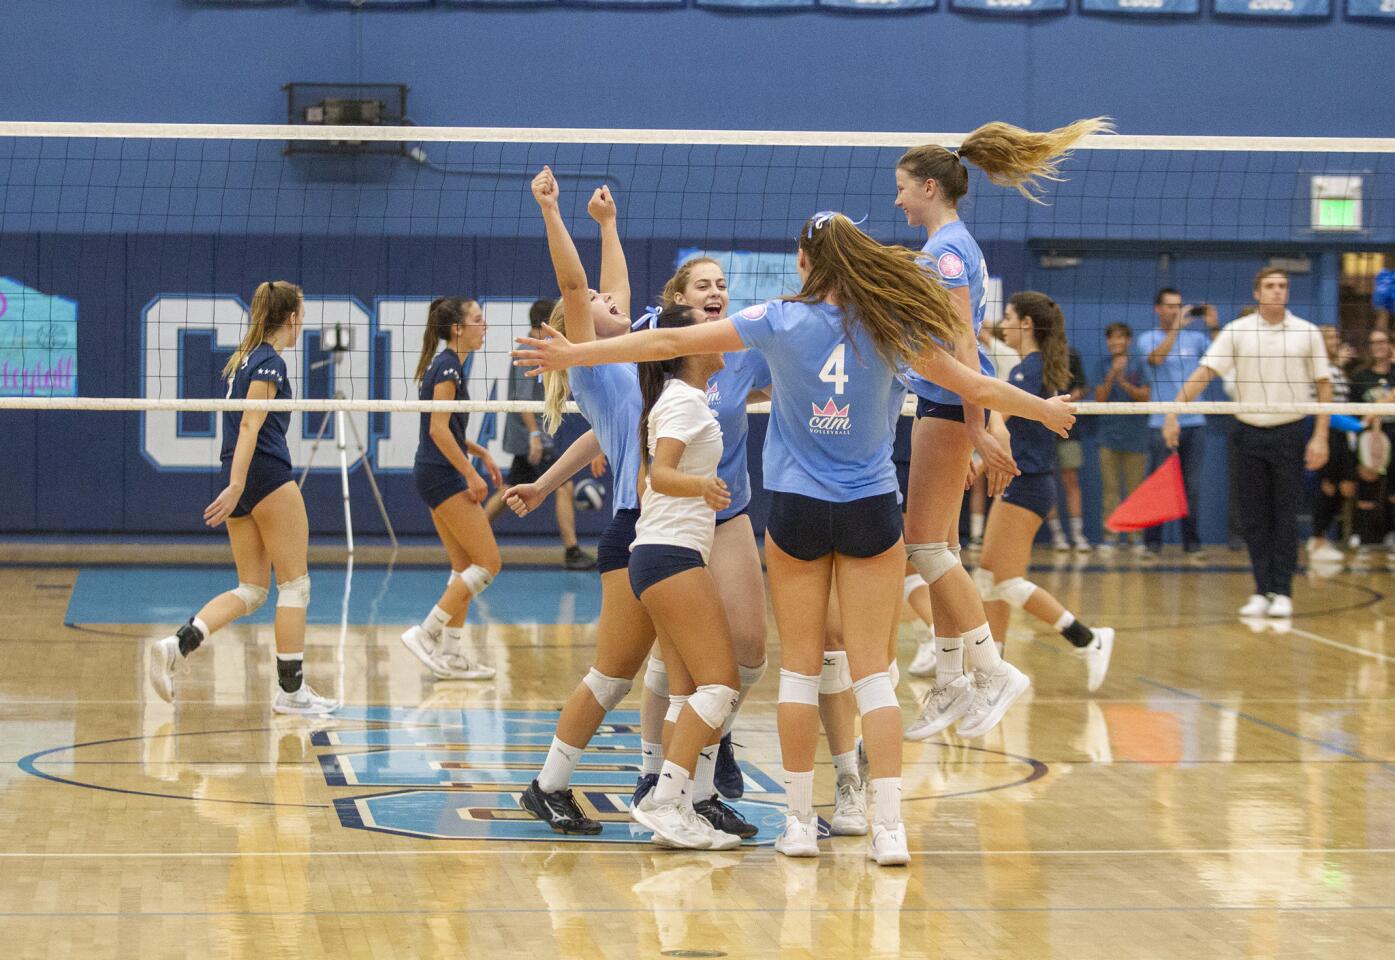 Corona del Mar celebrates after sweeping Newport Harbor 3-0 during the Battle of the Bay match on Thursday, October 11.